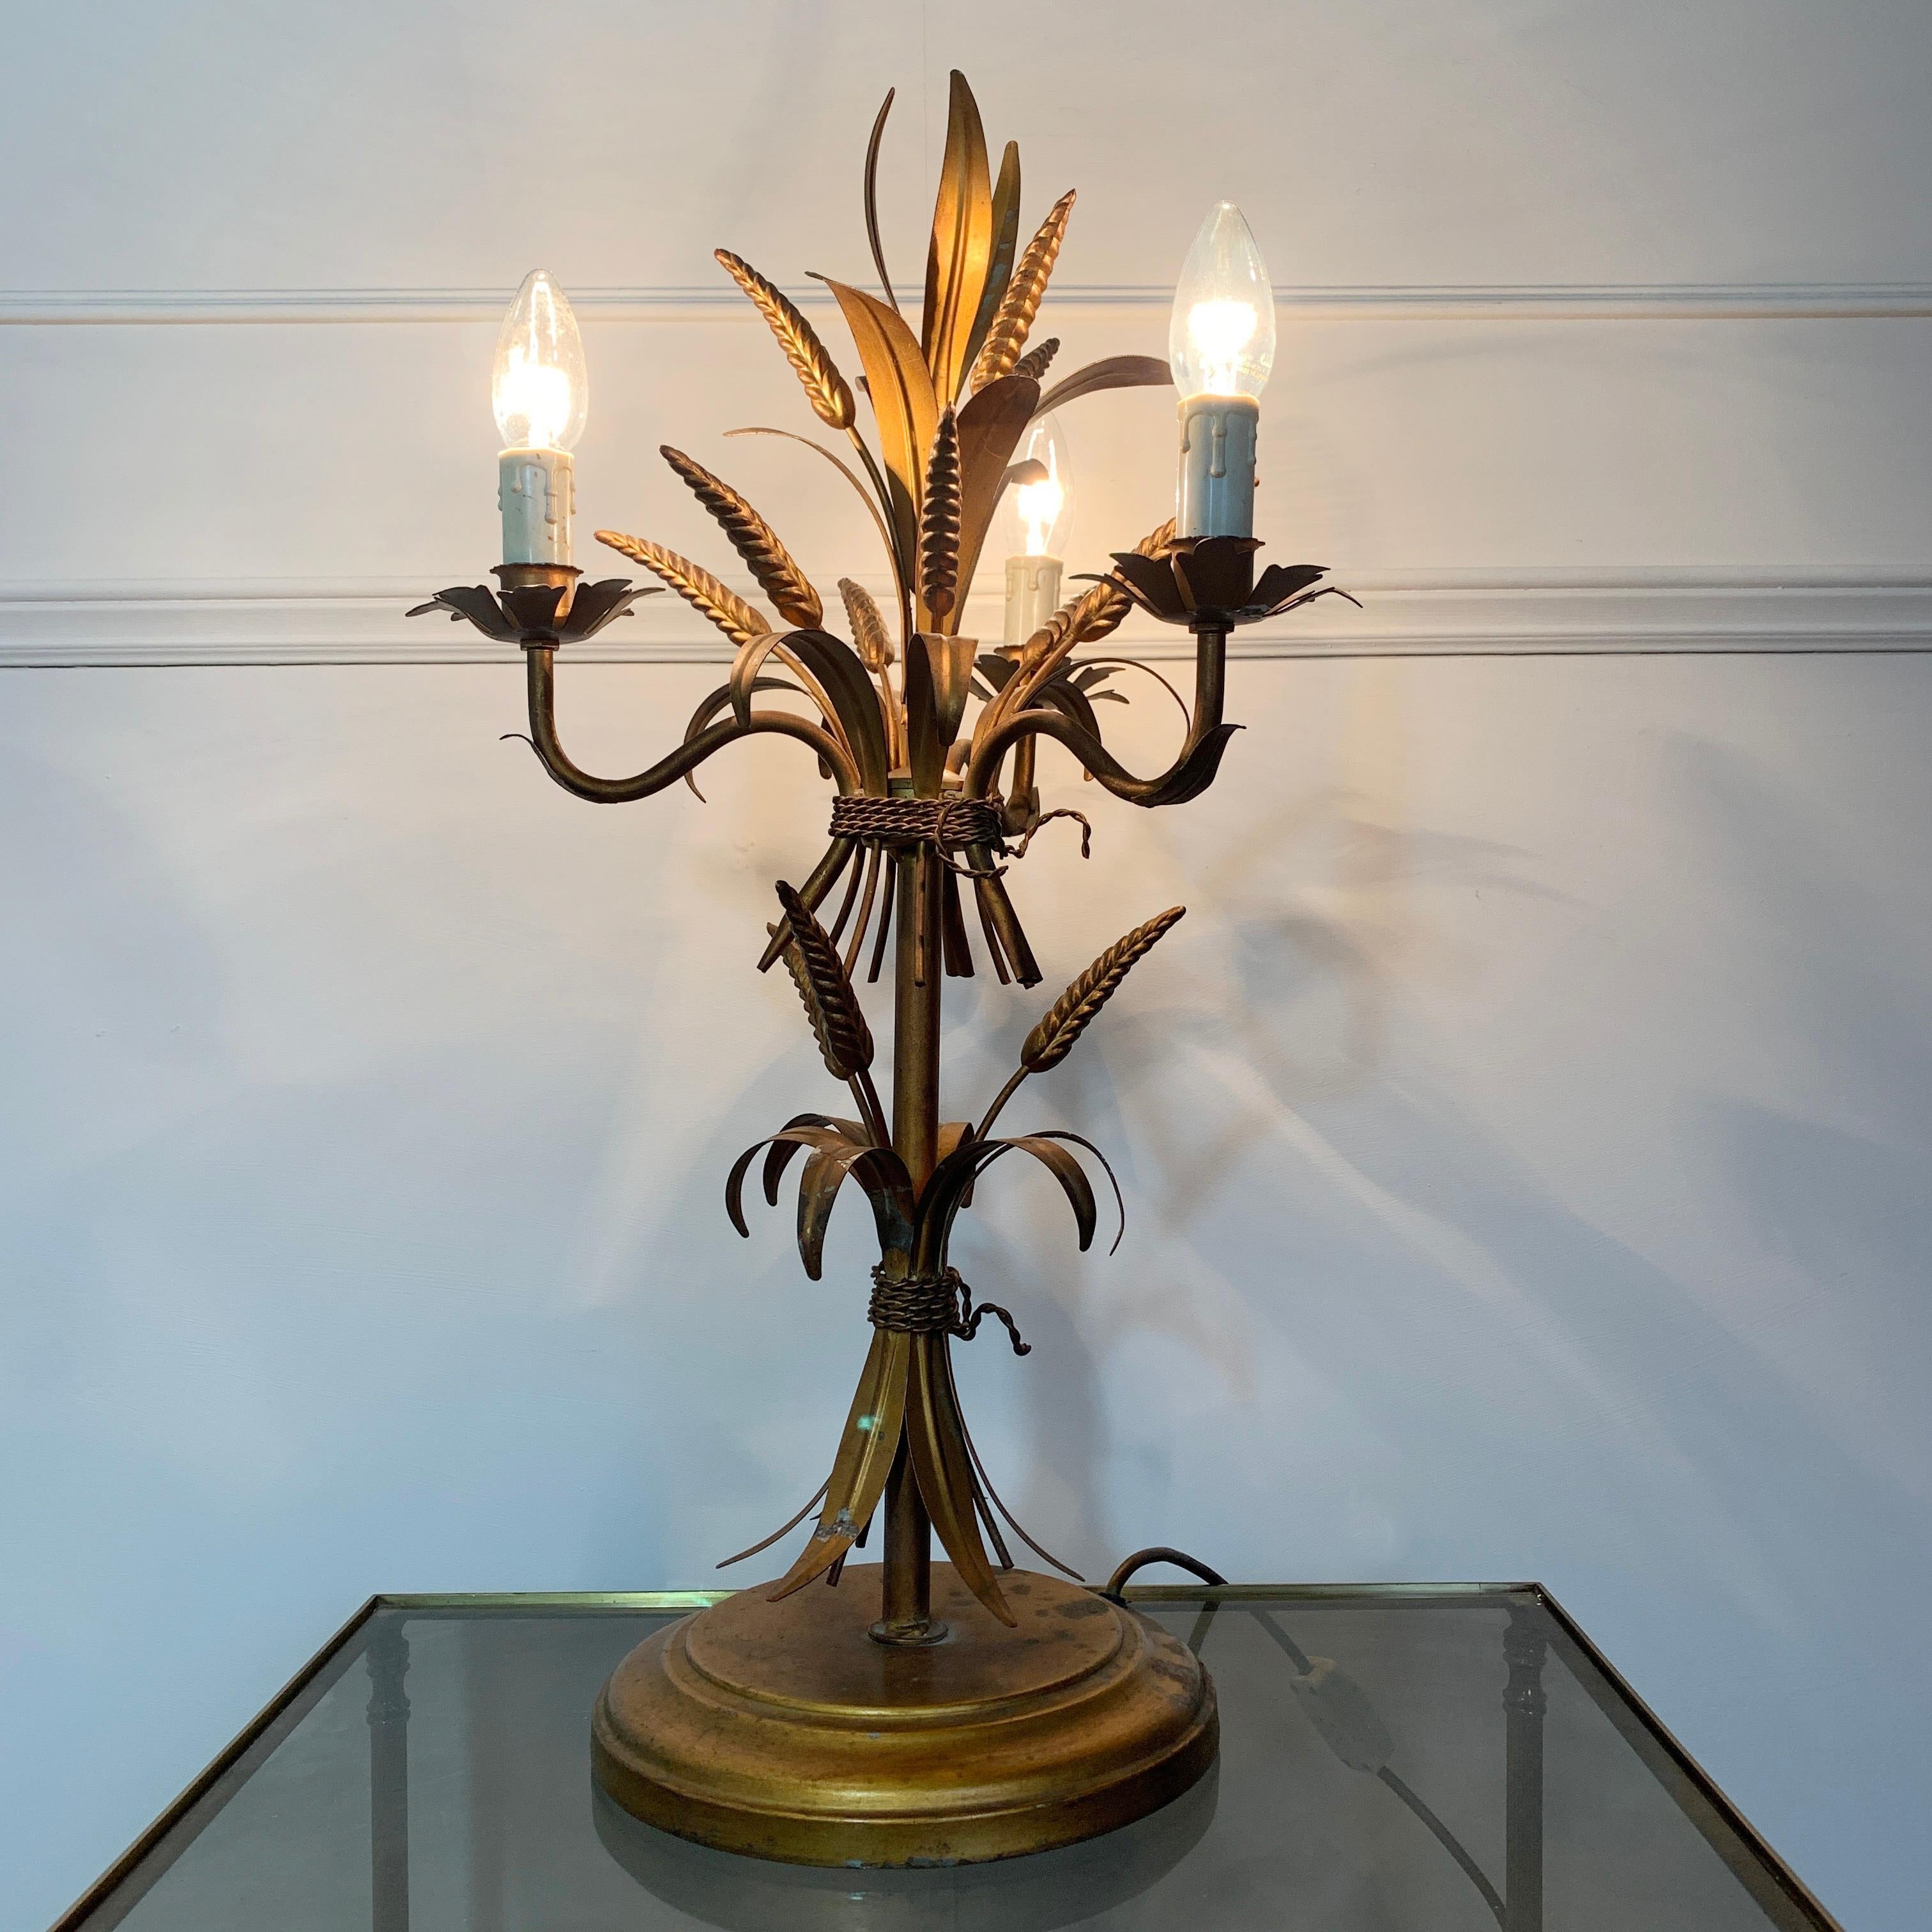 Hans Kögl wheat sheaf table lamp, circa 1970s
Statement Wheatsheaf and gilt leaf lamp by Hans Kögl

64cm height, 37cm width, base 25cm width

There is a long lead with inline switch for ease of use
3 lampholders with faux candle covers, e14 lamp